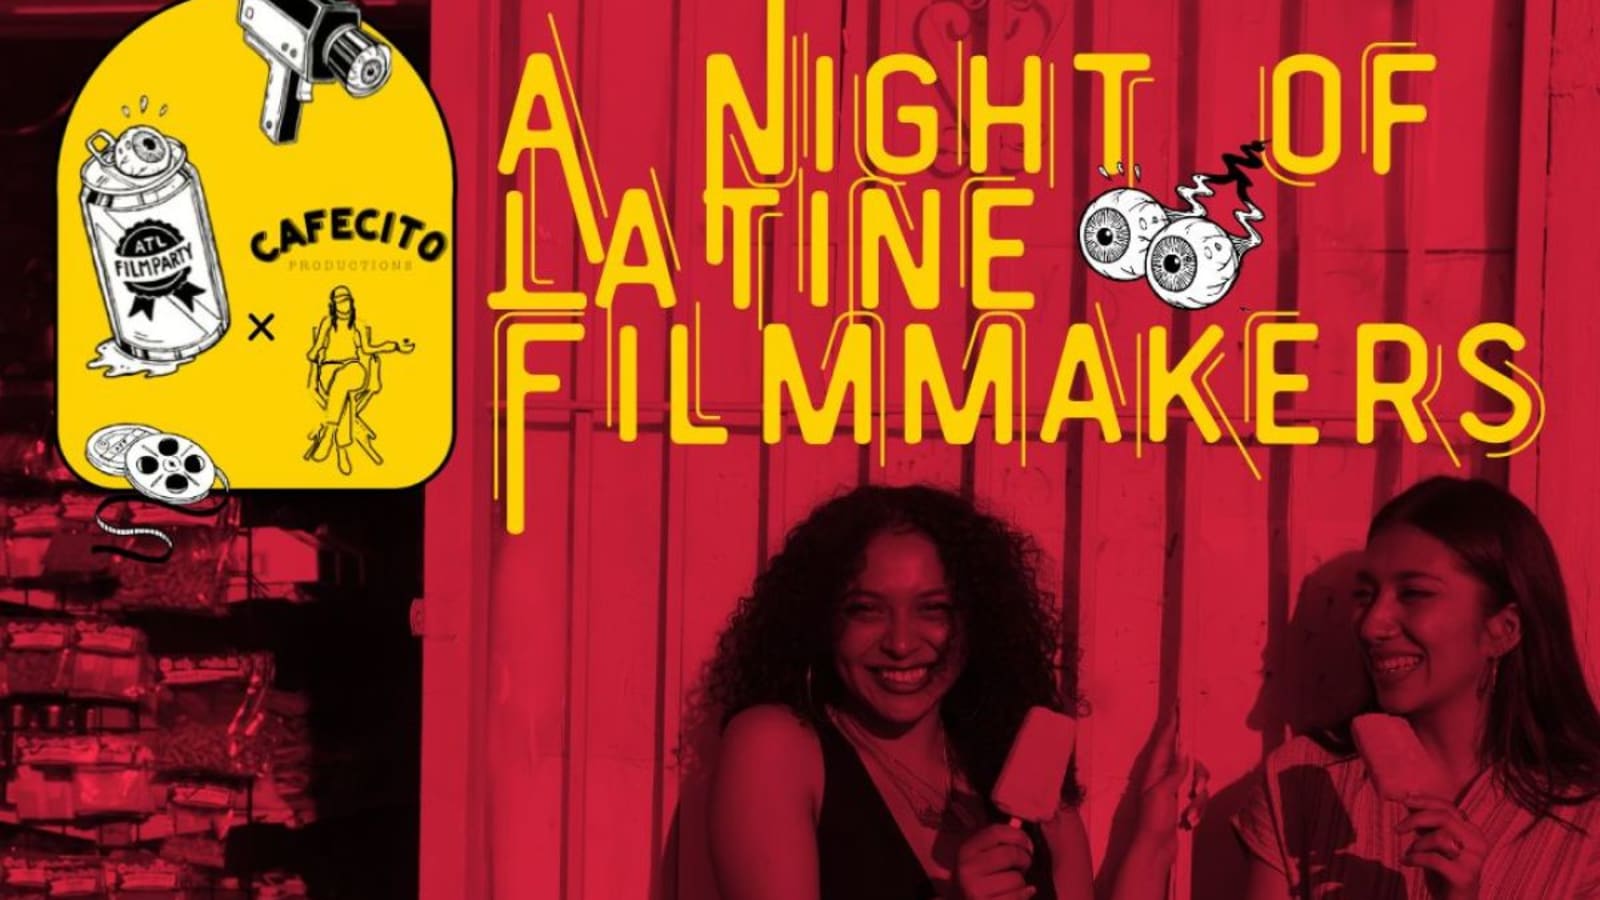 A Night of Latine Filmmakers